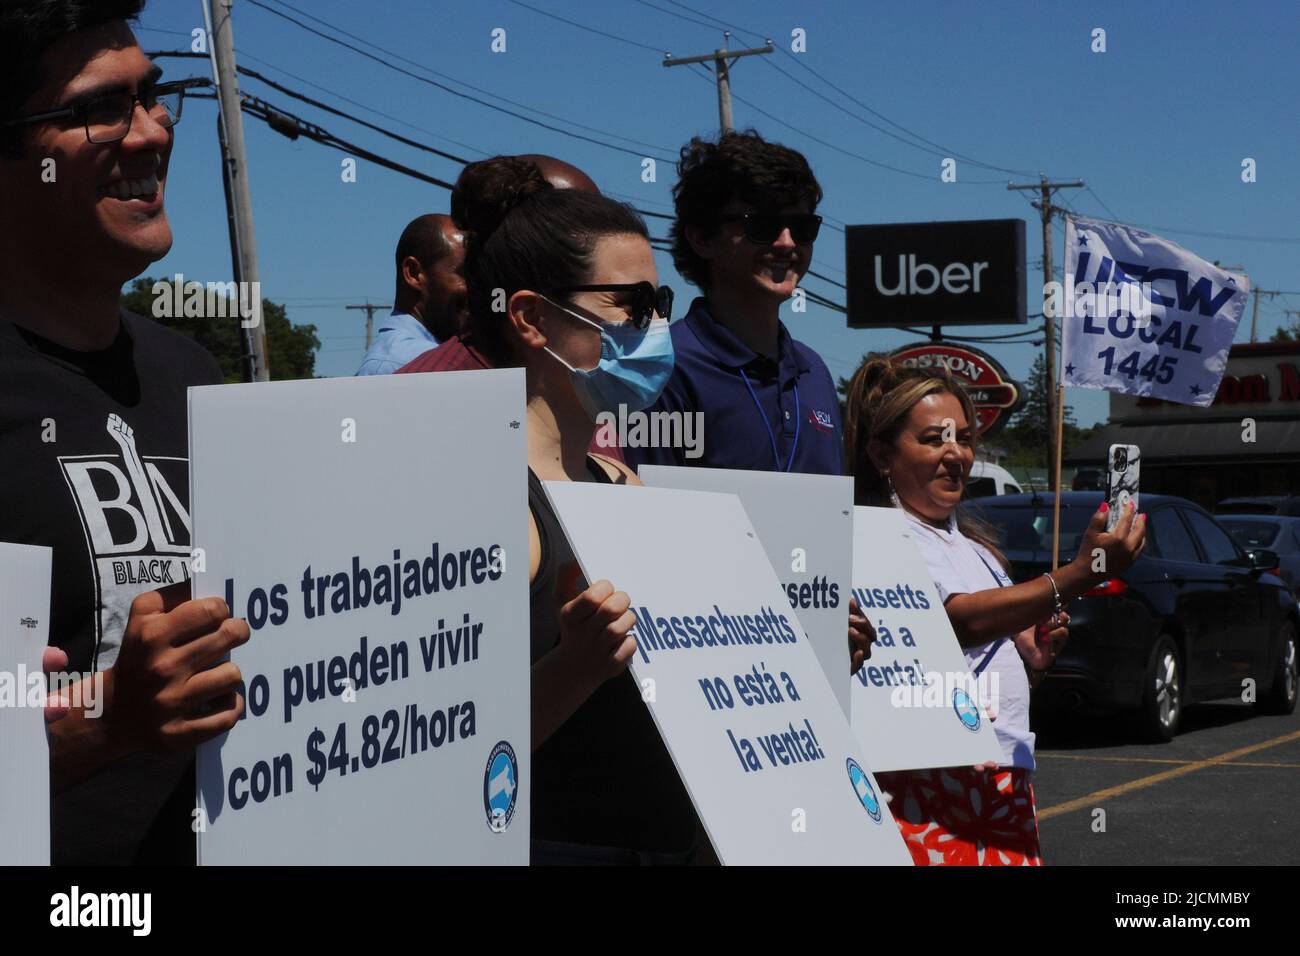 Drivers protest Uber's elimination of fuel surcharges for drivers amid high gas prices, in Saugus, Massachusetts, U.S. June 14, 2022. REUTERS/Brian Snyder Stock Photo